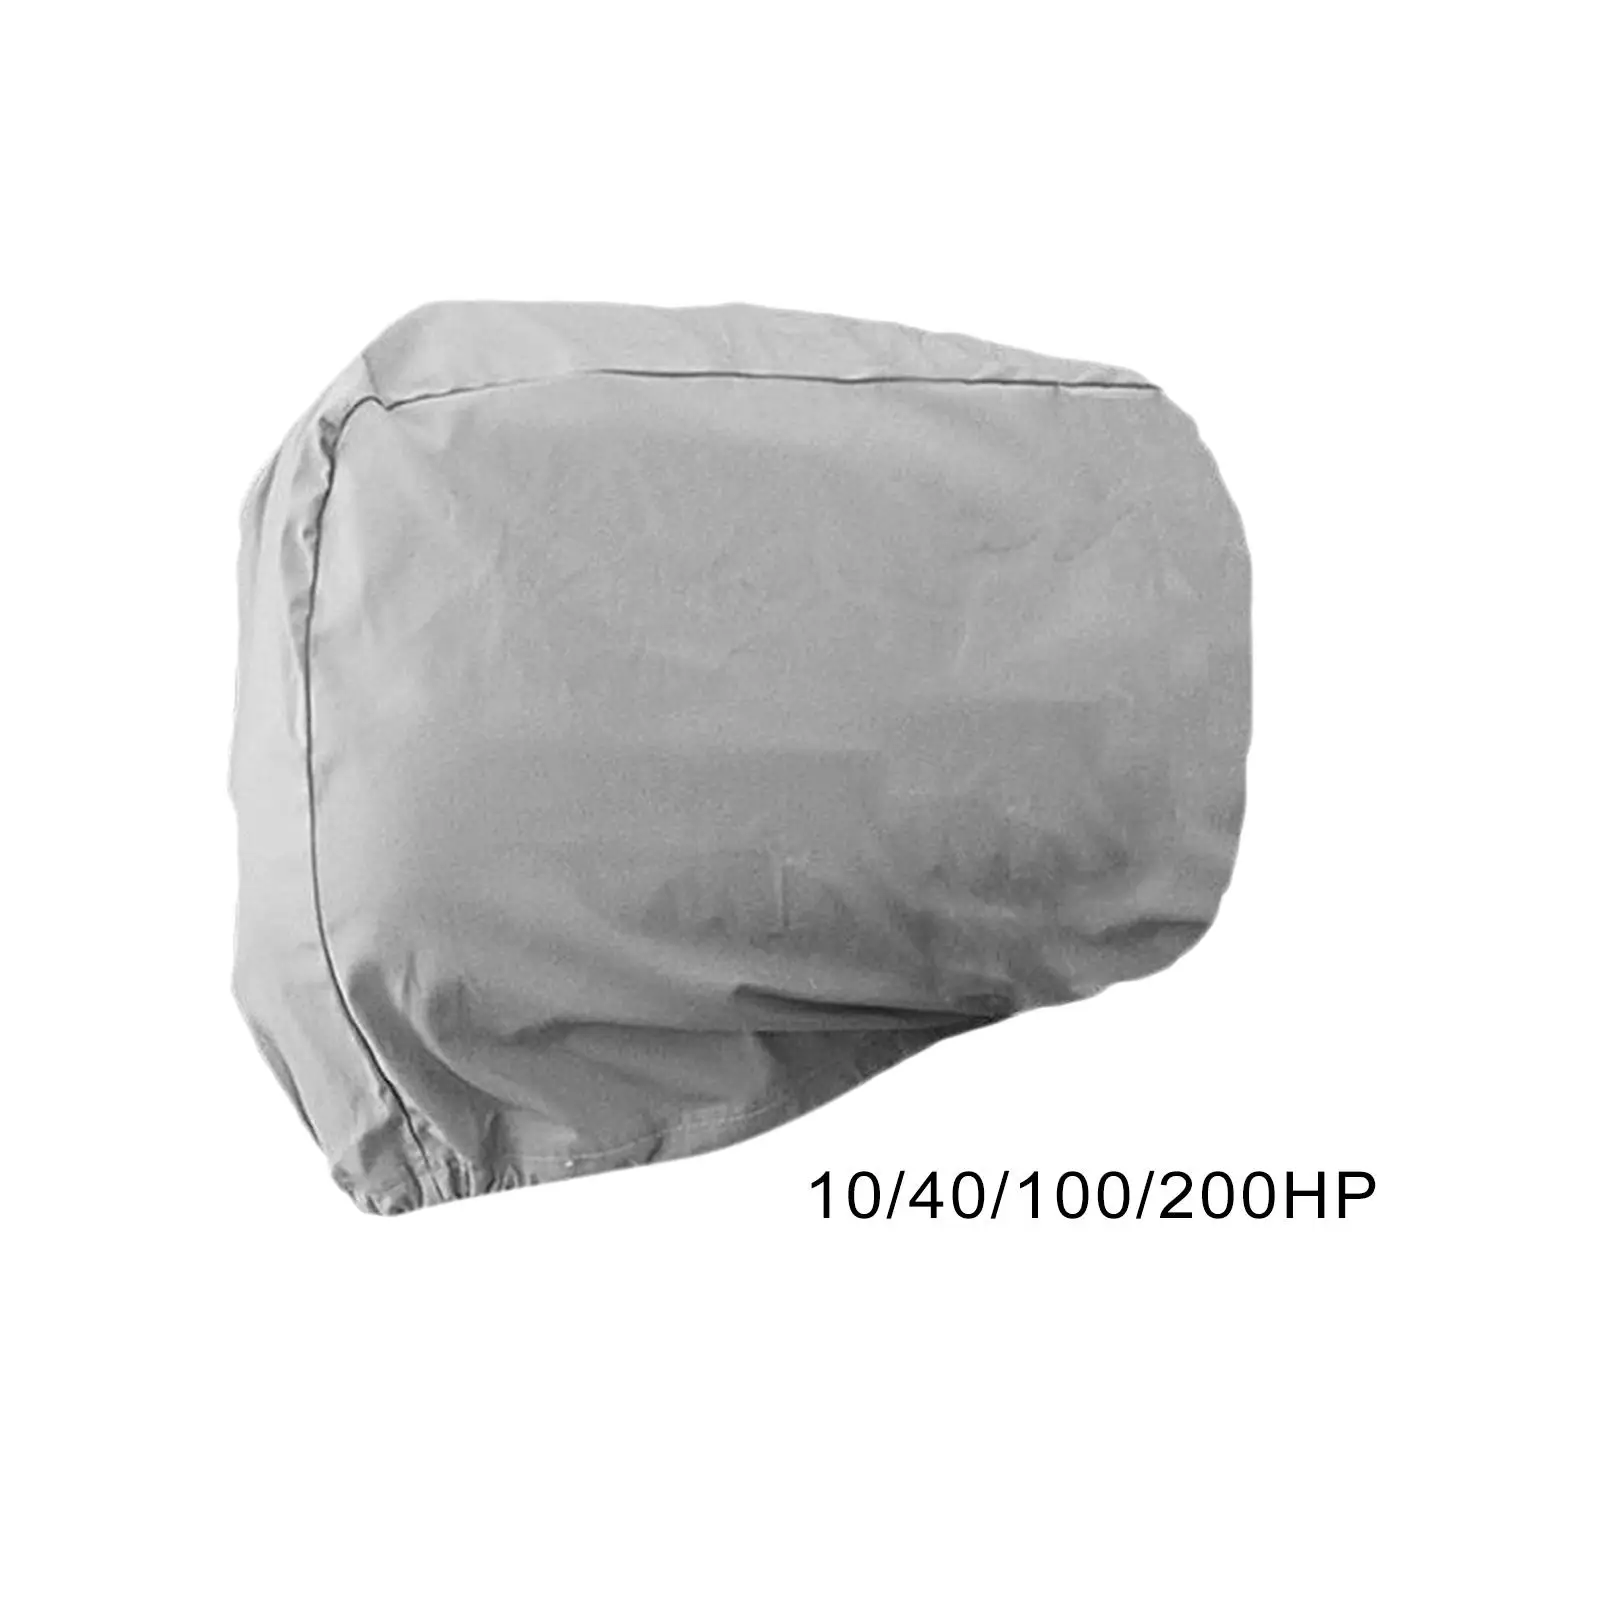 Outboard Motor Cover with Shrink Cord Weather Resistant Boat Hood Covers for Sea Fishing